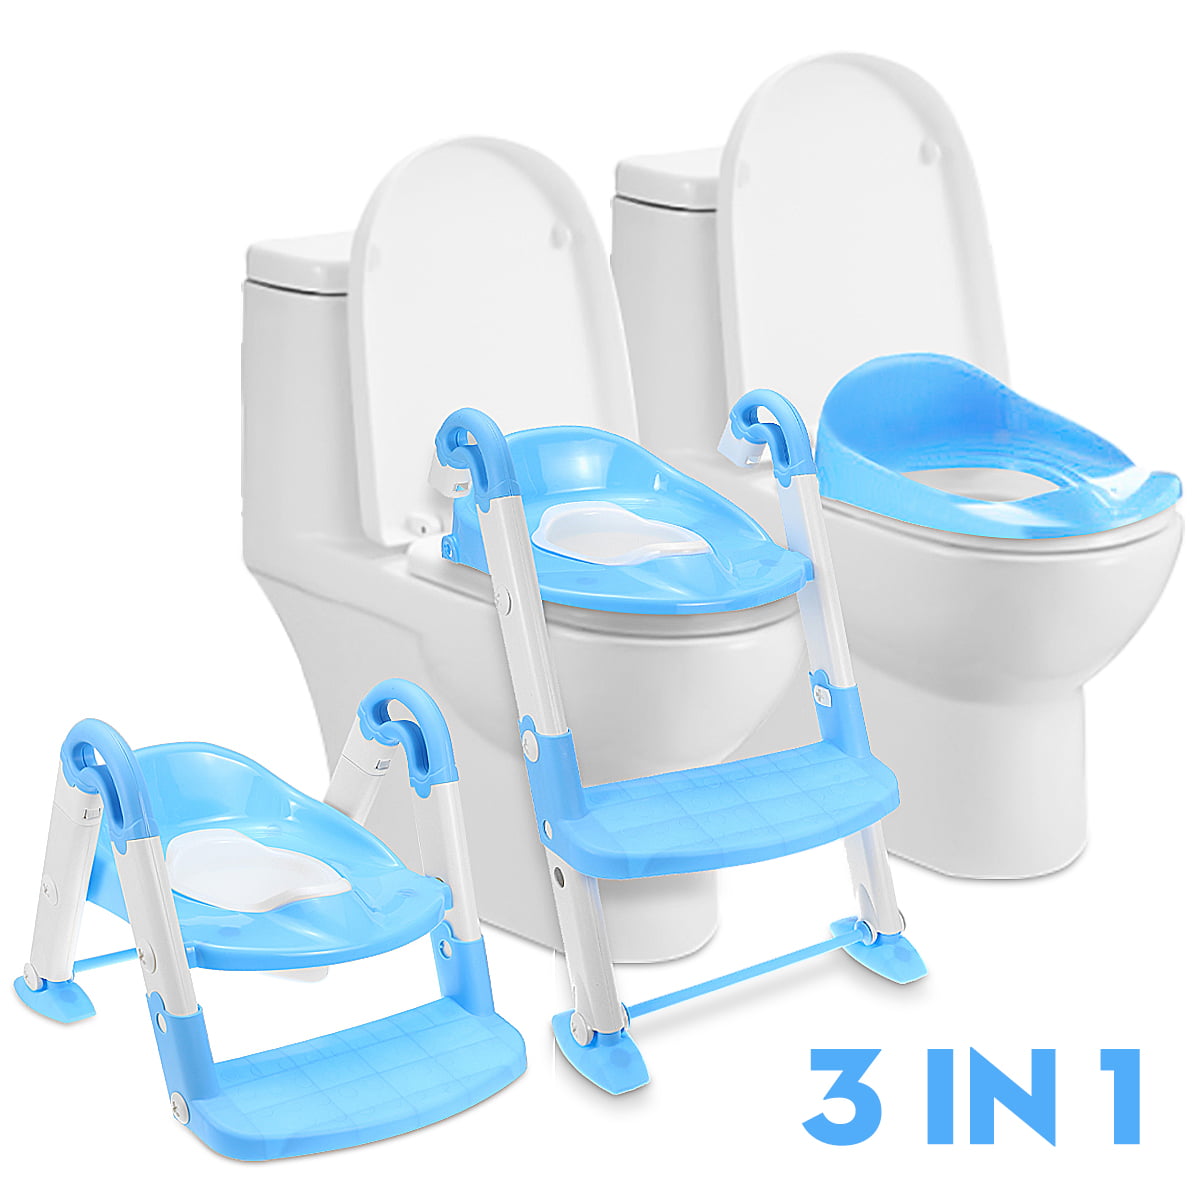 New Blue Easy Clean Kids Toddler Potty Training Chair Seat Removable Potty Lid 